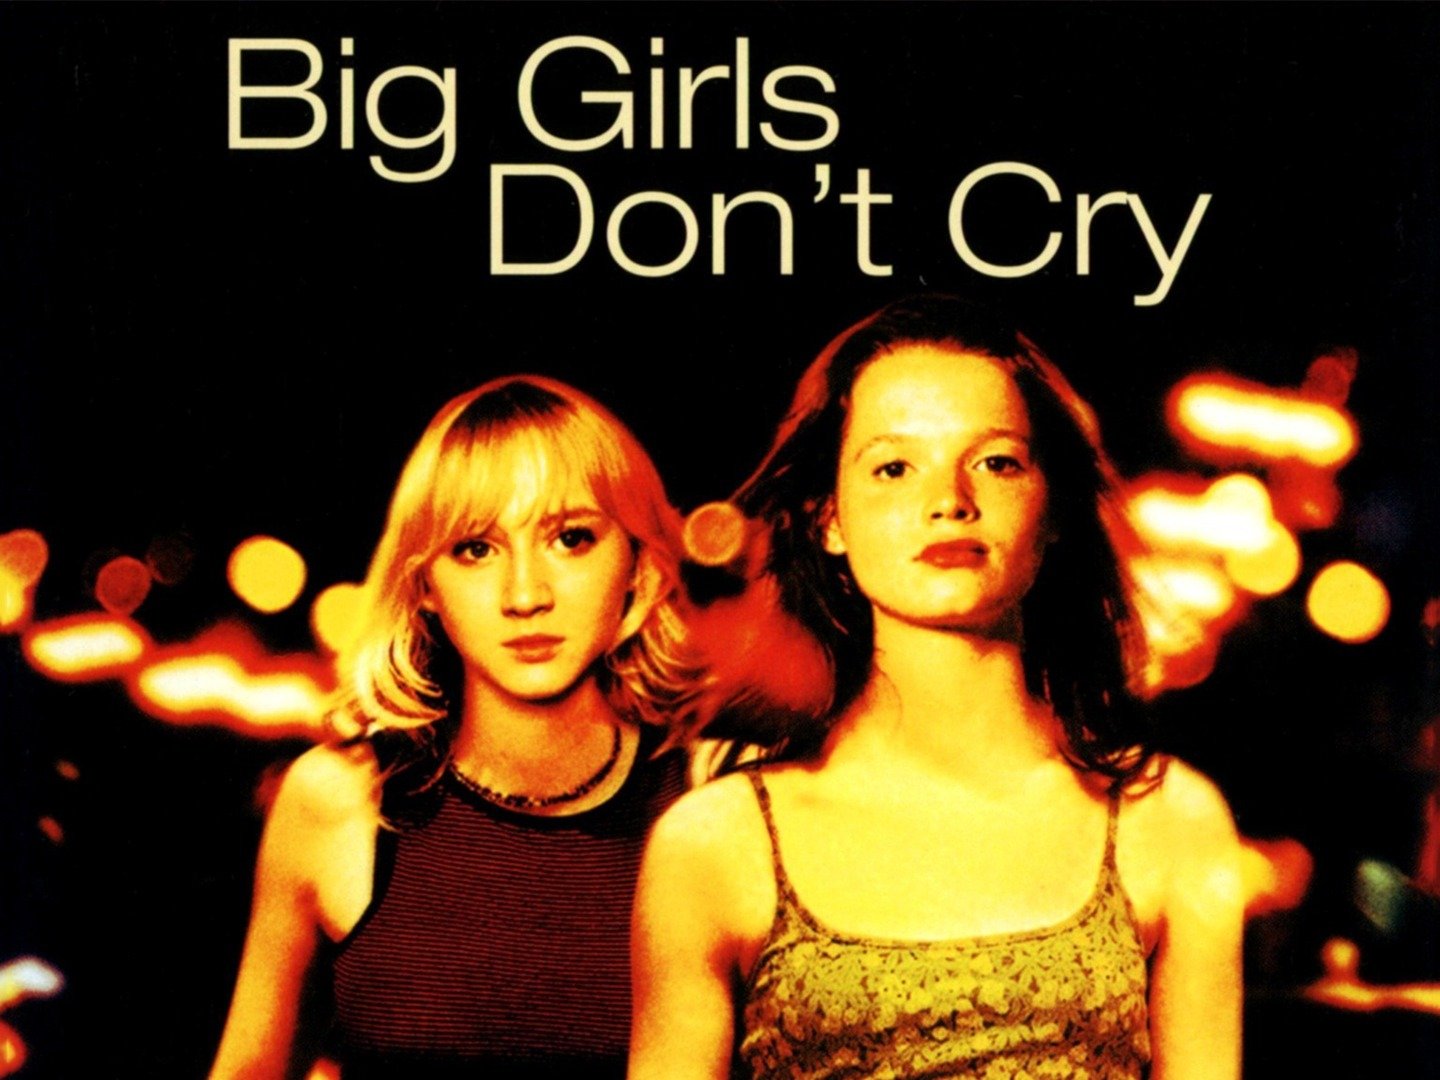 Big girls don't Cry. Girls don't Cry сердце. Girls don't Cry откуда. Supergirls don't Cry.